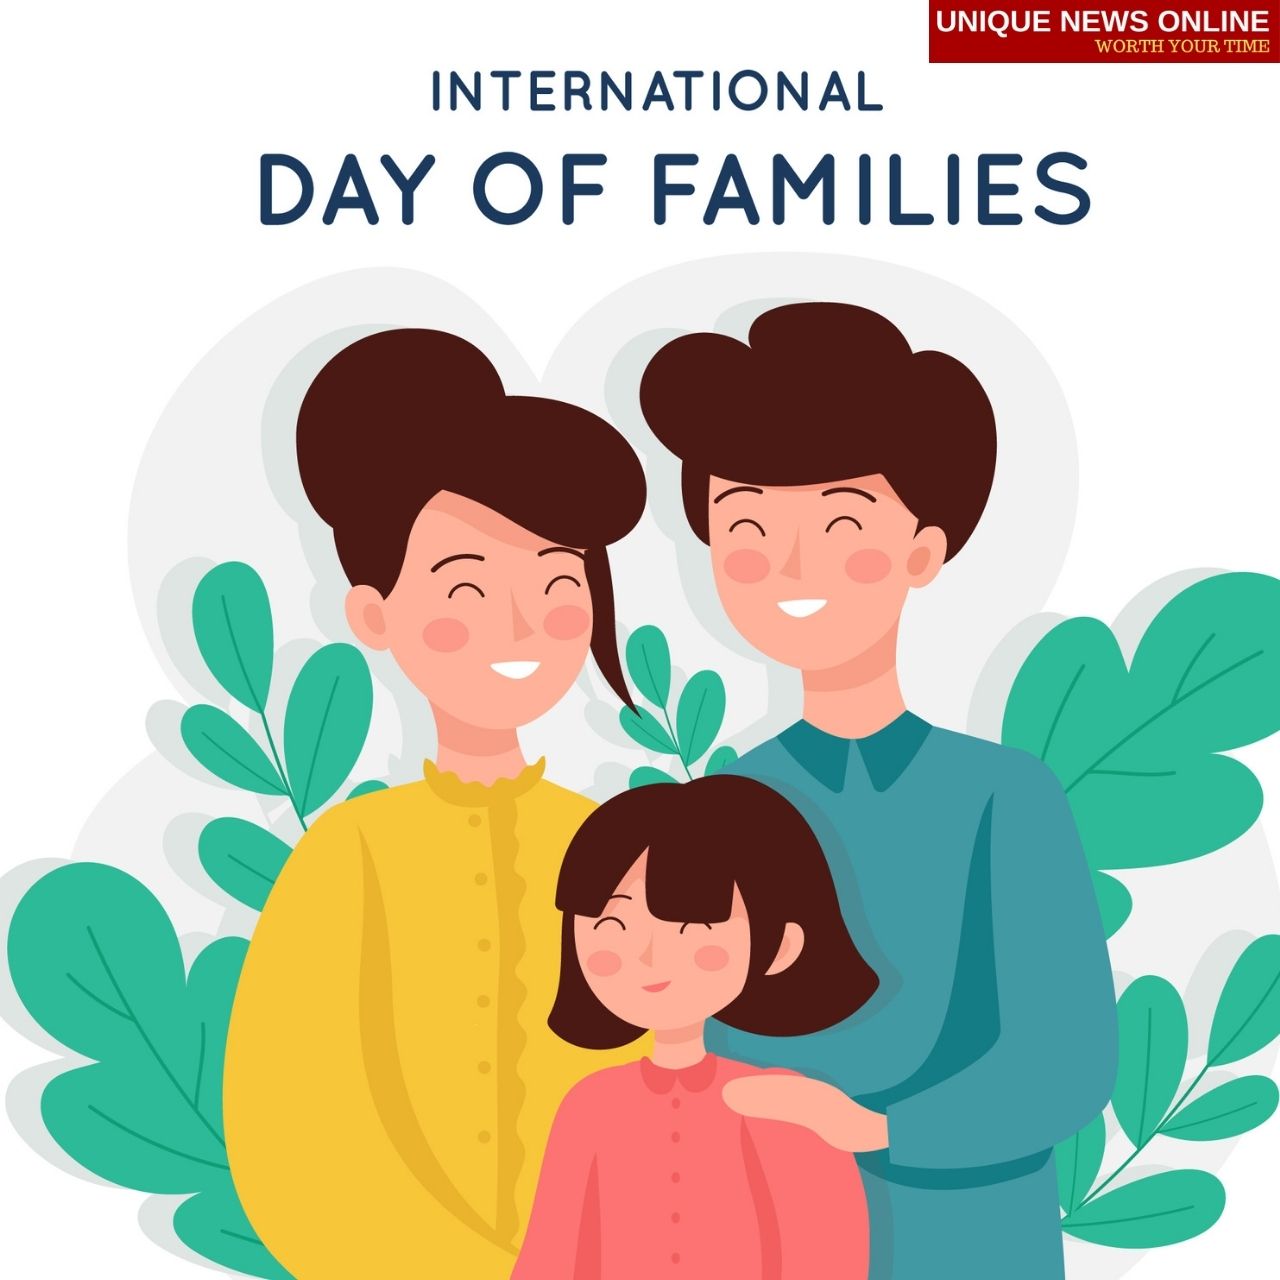 International Day of Families 2021 Theme